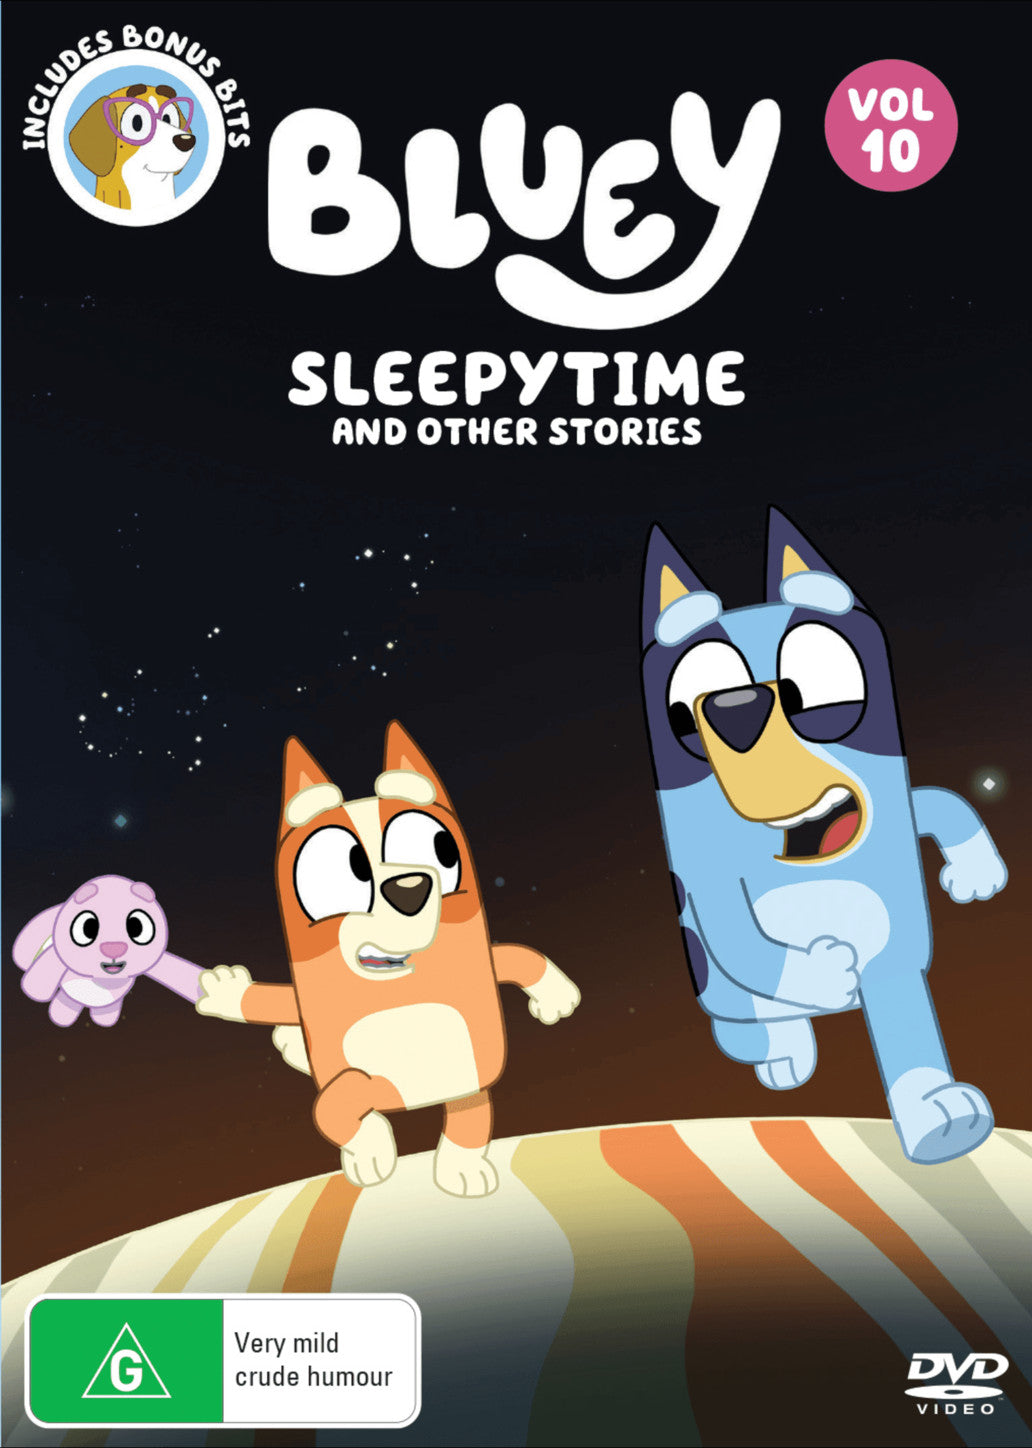 BLUEY: SLEEPYTIME AND OTHER STORIES (VOL 10)